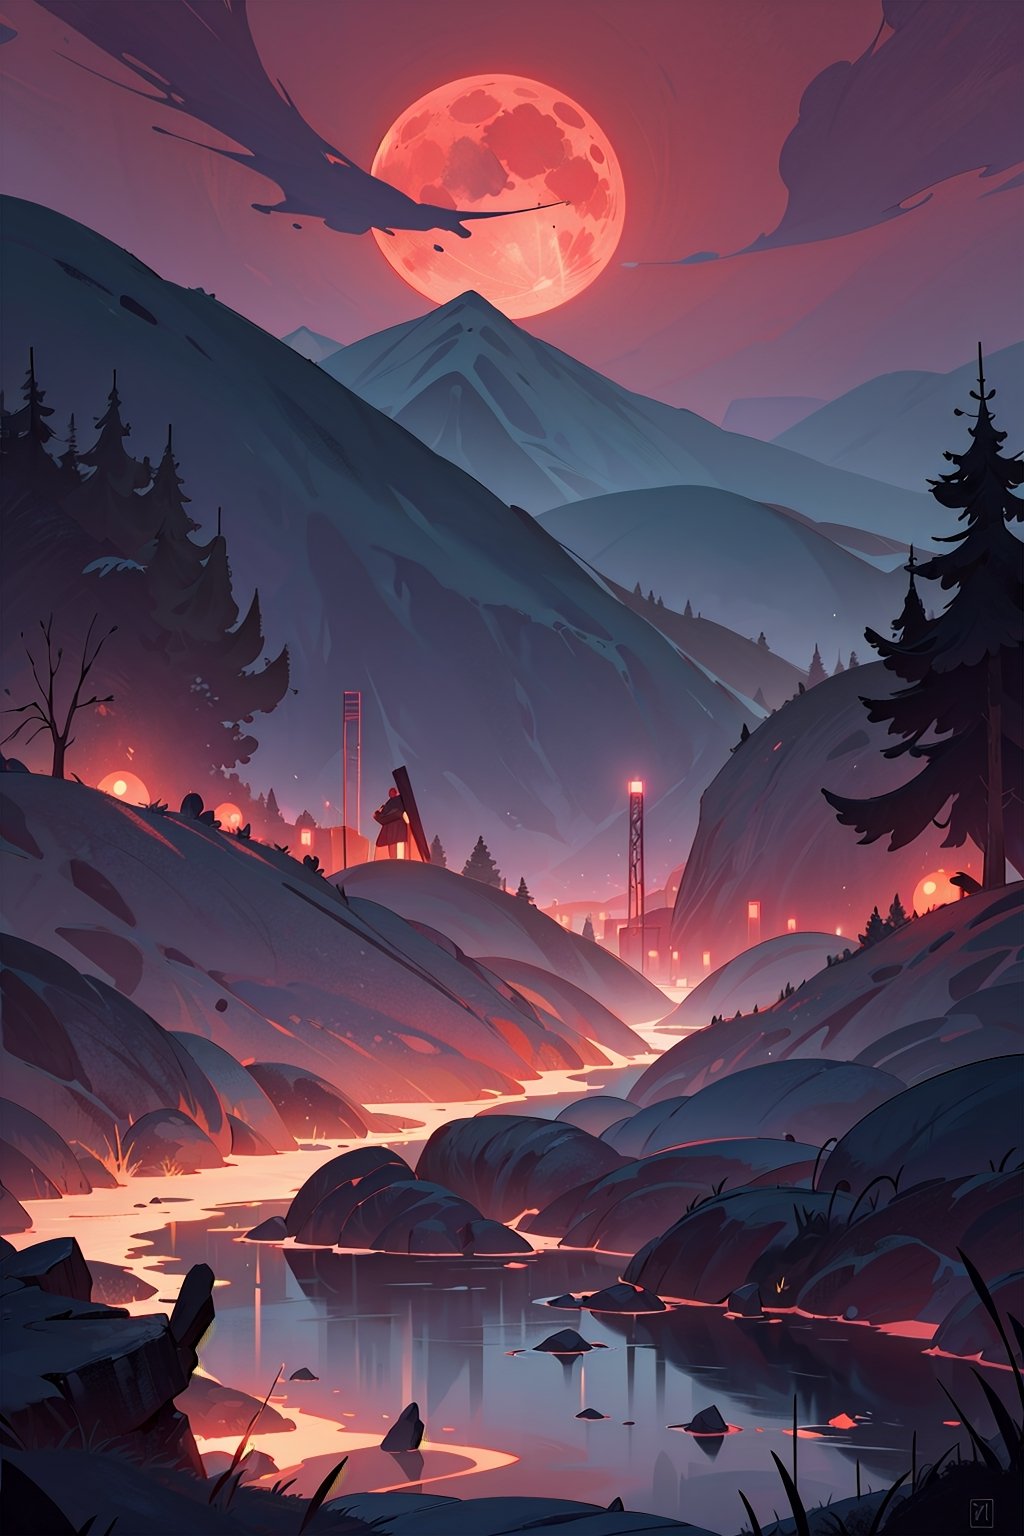 Generate a digital art image featuring a surreal and otherworldly scene of a red moon rising over a mountainous landscape. The moon, large and centrally positioned, casts a red glow over the dark, mountainous terrain. The sky is a deep red, evoking an intense atmosphere. A river flows through the landscape, reflecting the moon's eerie light. Encourage diverse interpretations, suggesting that the image could be seen as a representation of a fantasy world, a post-apocalyptic scenario, or a symbolic expression of the artist's emotions